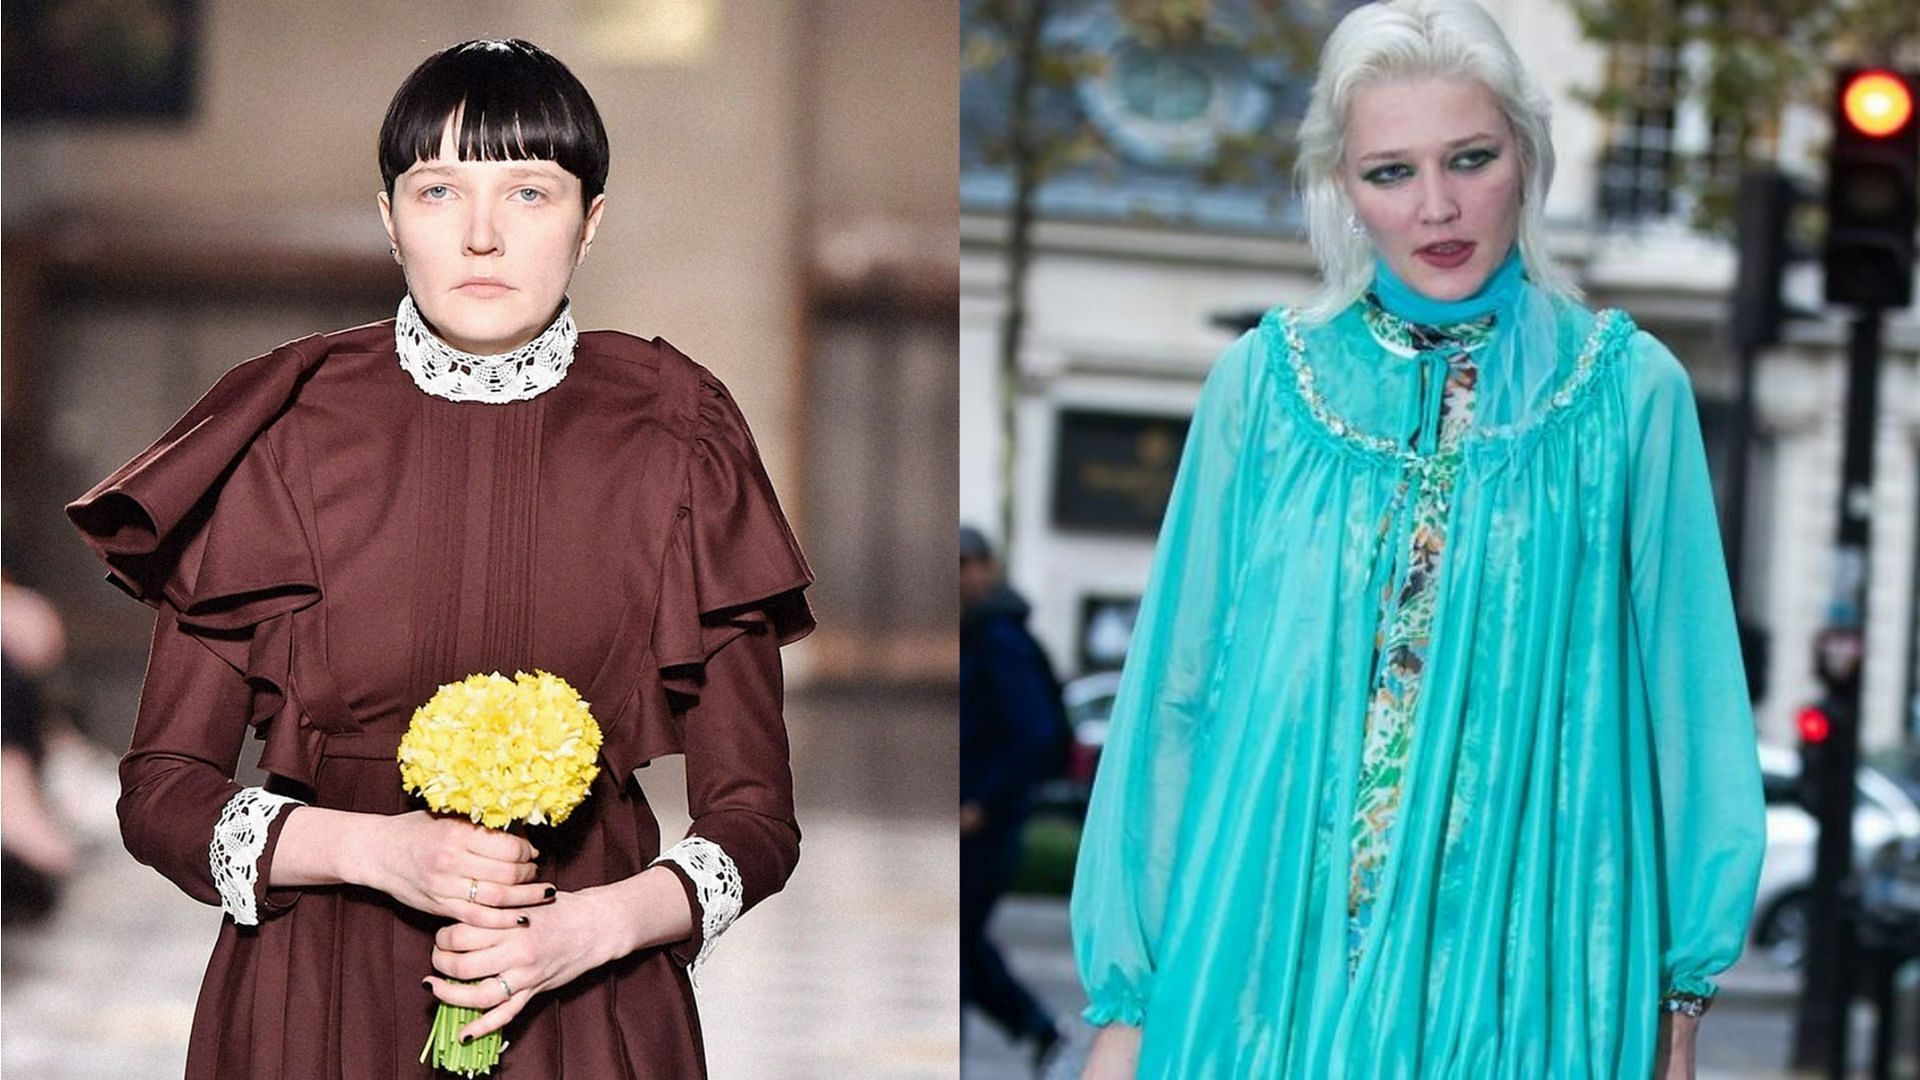 Jarring images from the Instagram account of a Balenciaga stylist explored (Images via Getty Images)